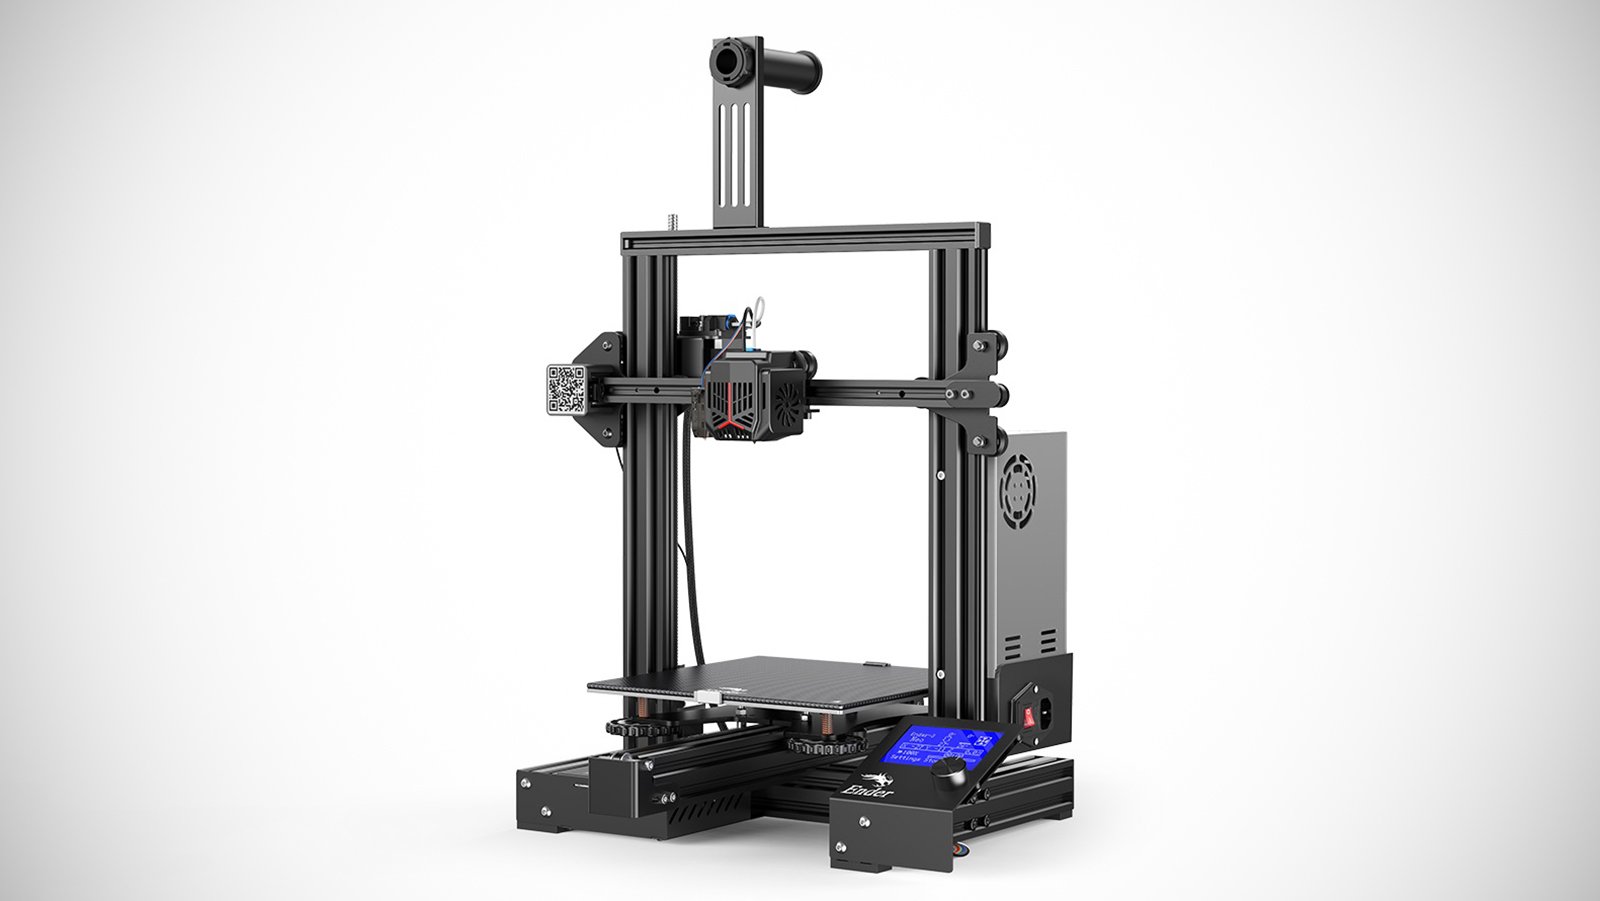 Creality Ender 3 Neo: Specs, Price, Release & Reviews | All3DP